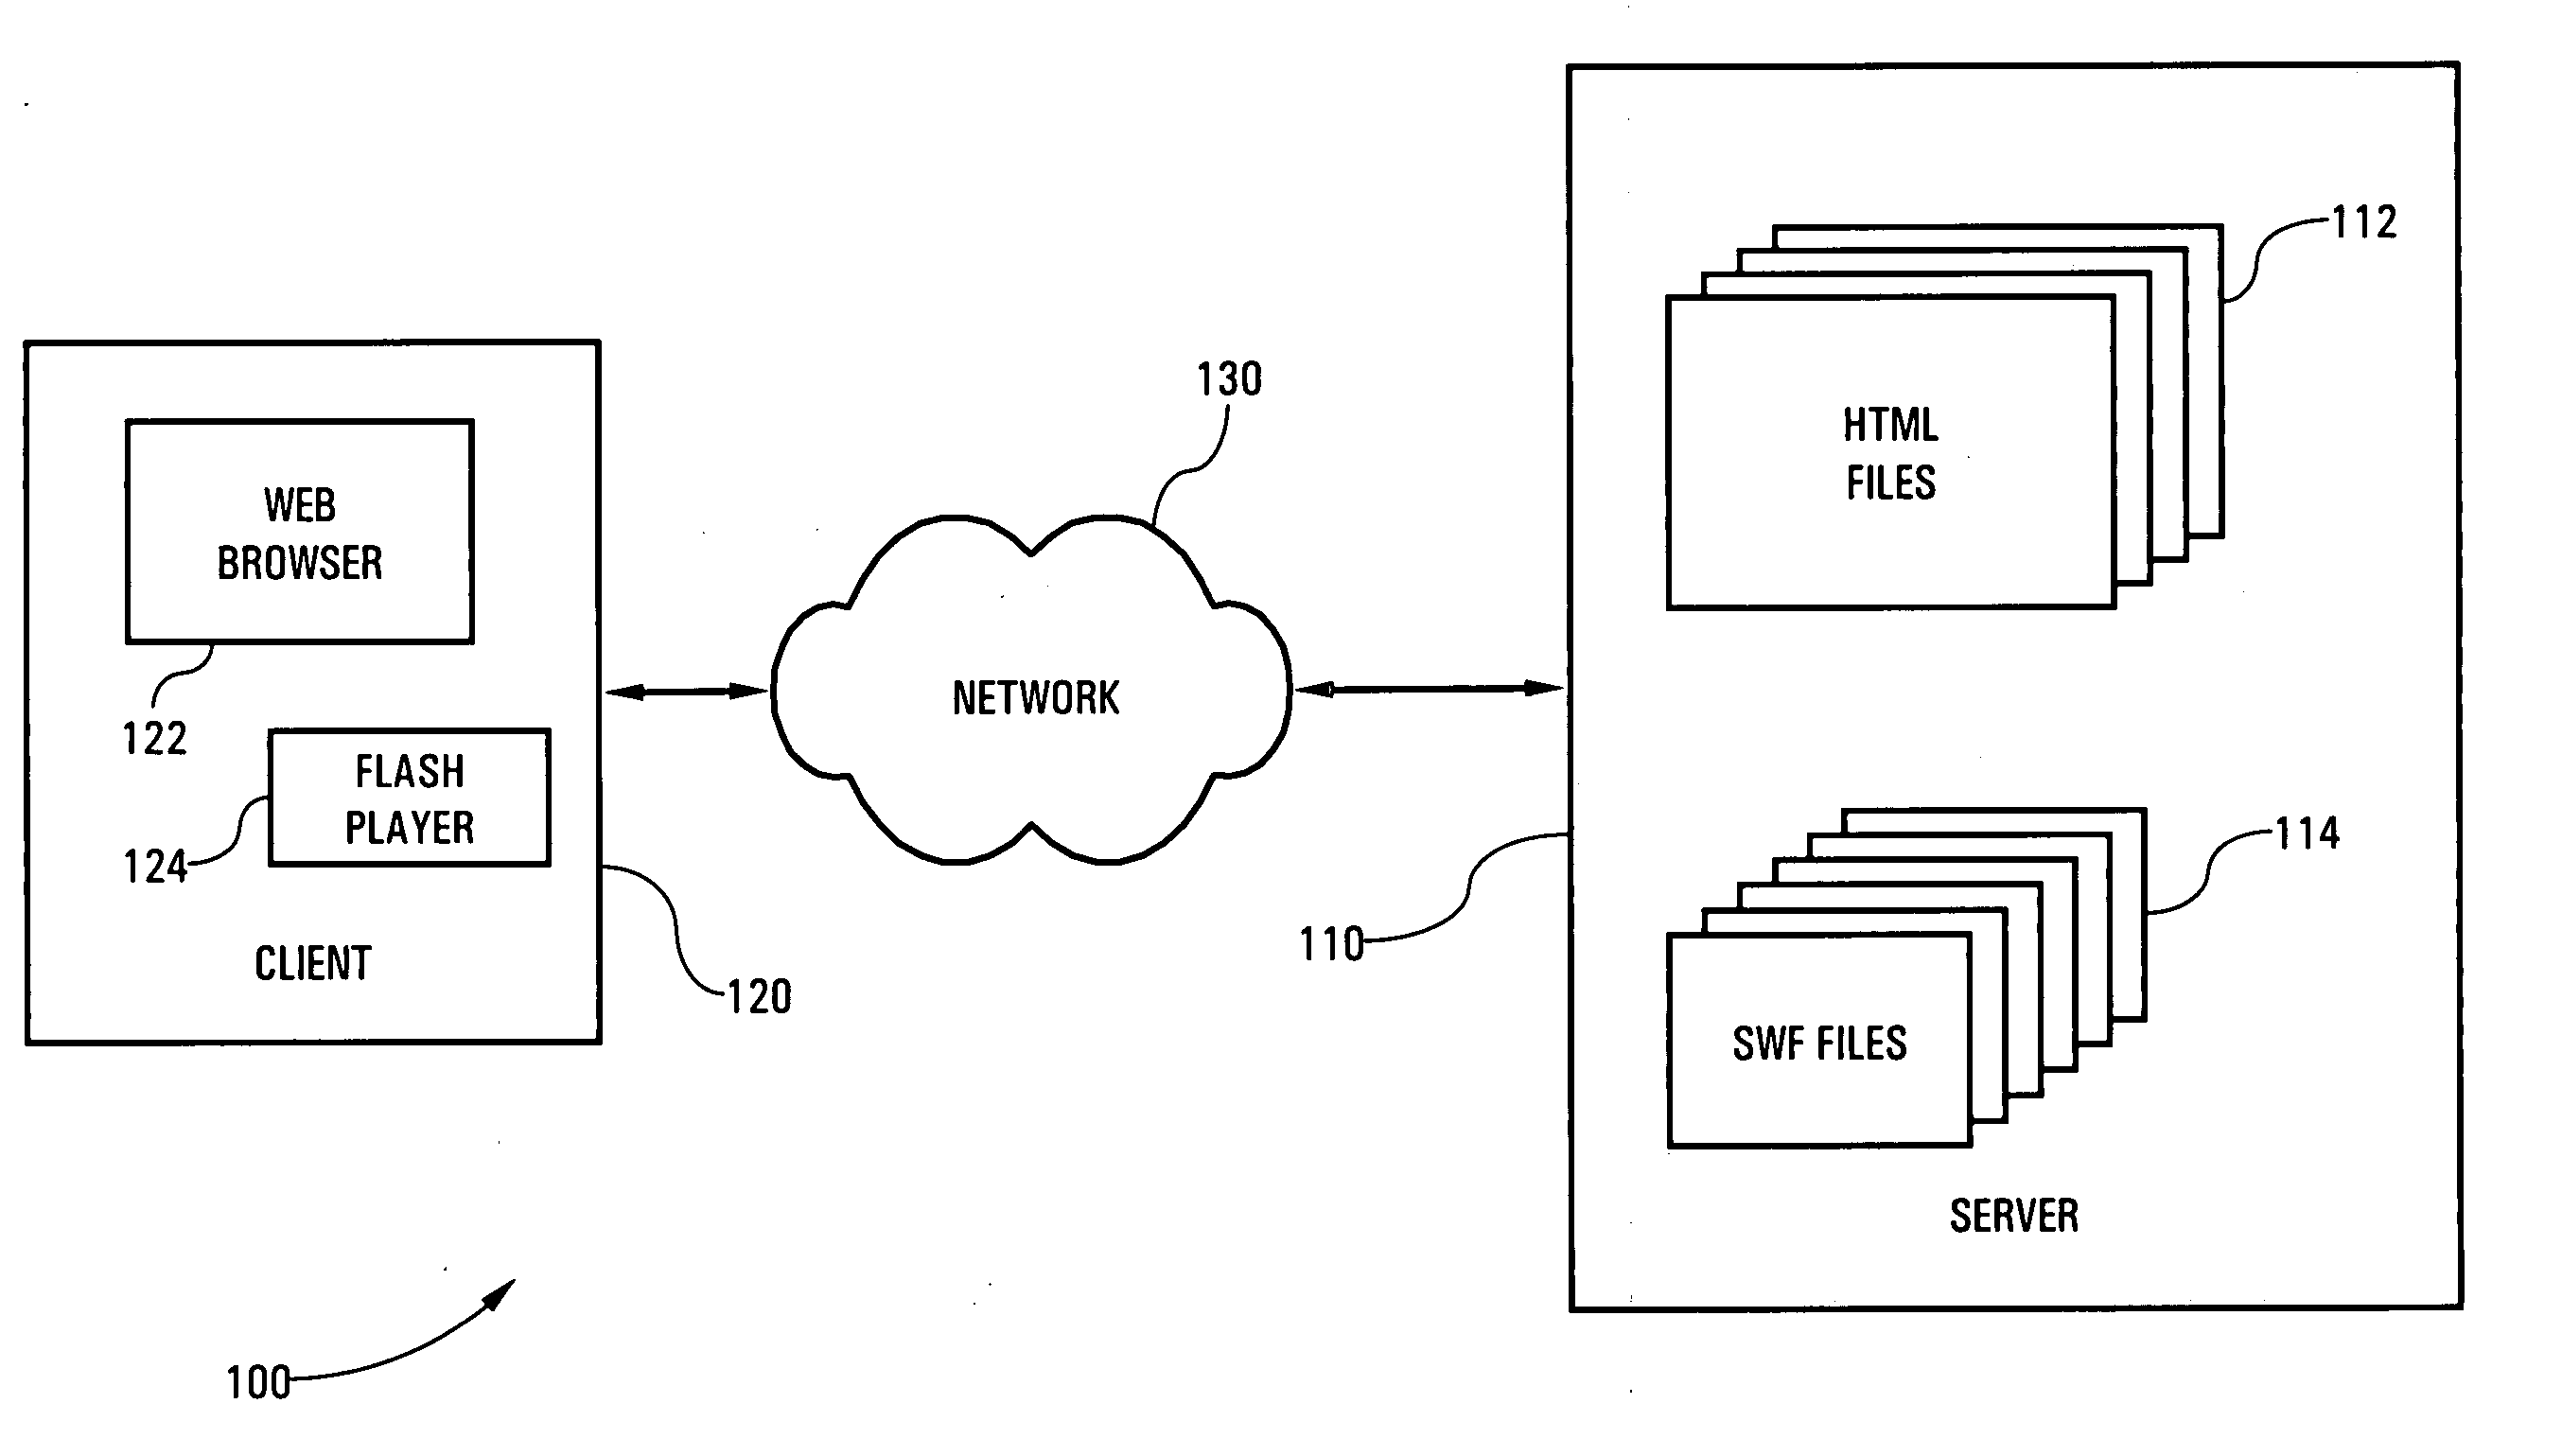 Speaking words language instruction system and methods